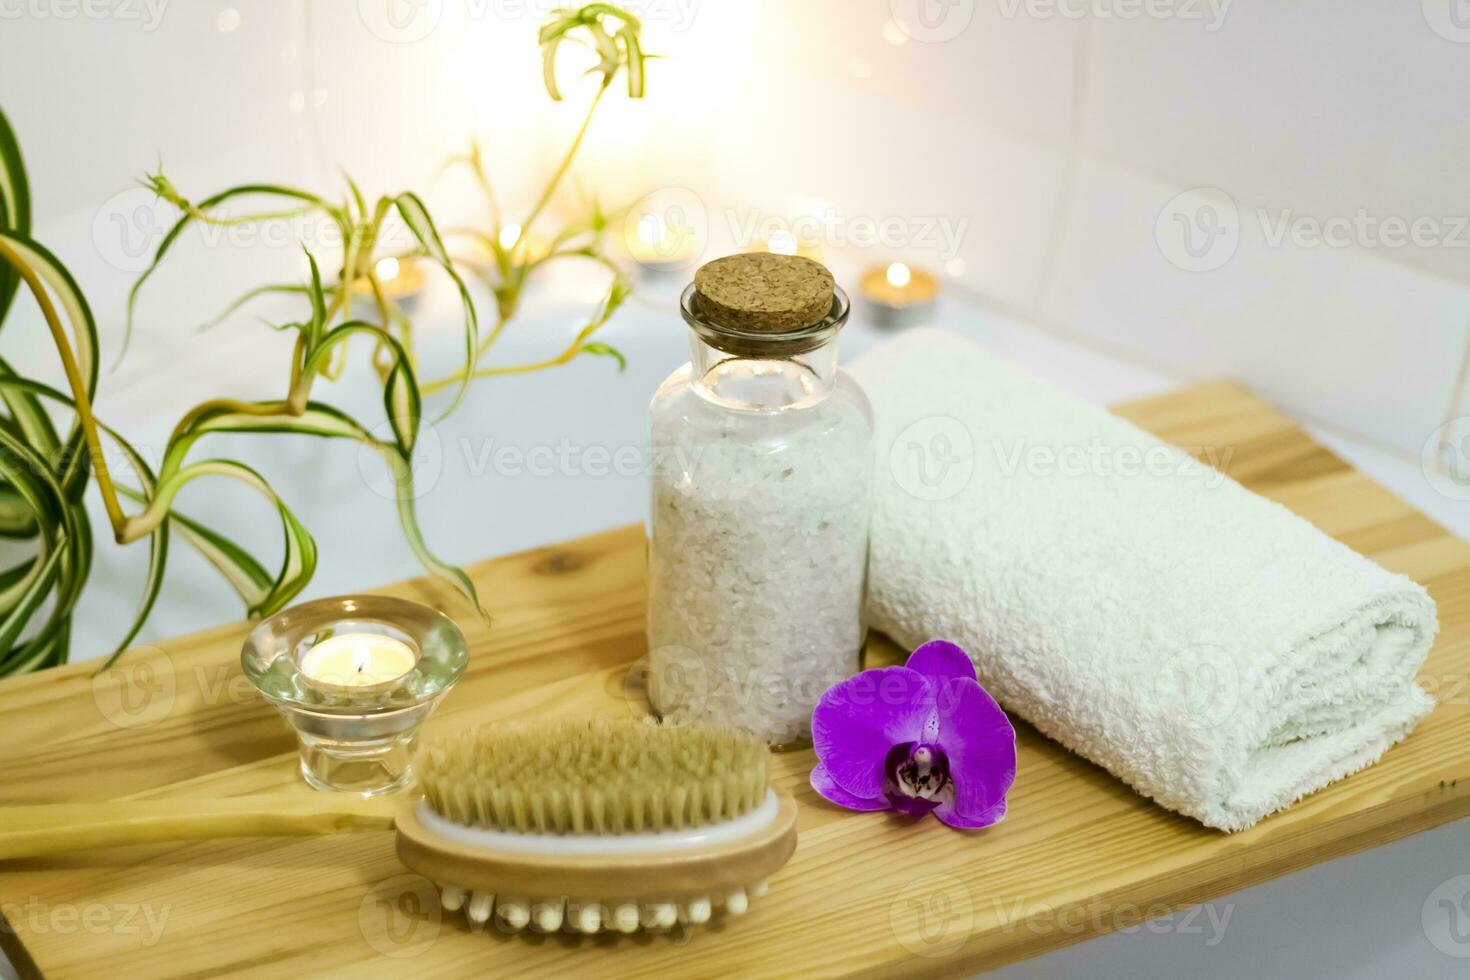 Spa-beauty salon, wellness center. Spa treatment aromatherapy for a woman's body in the bathroom with candles, oils and salt. photo